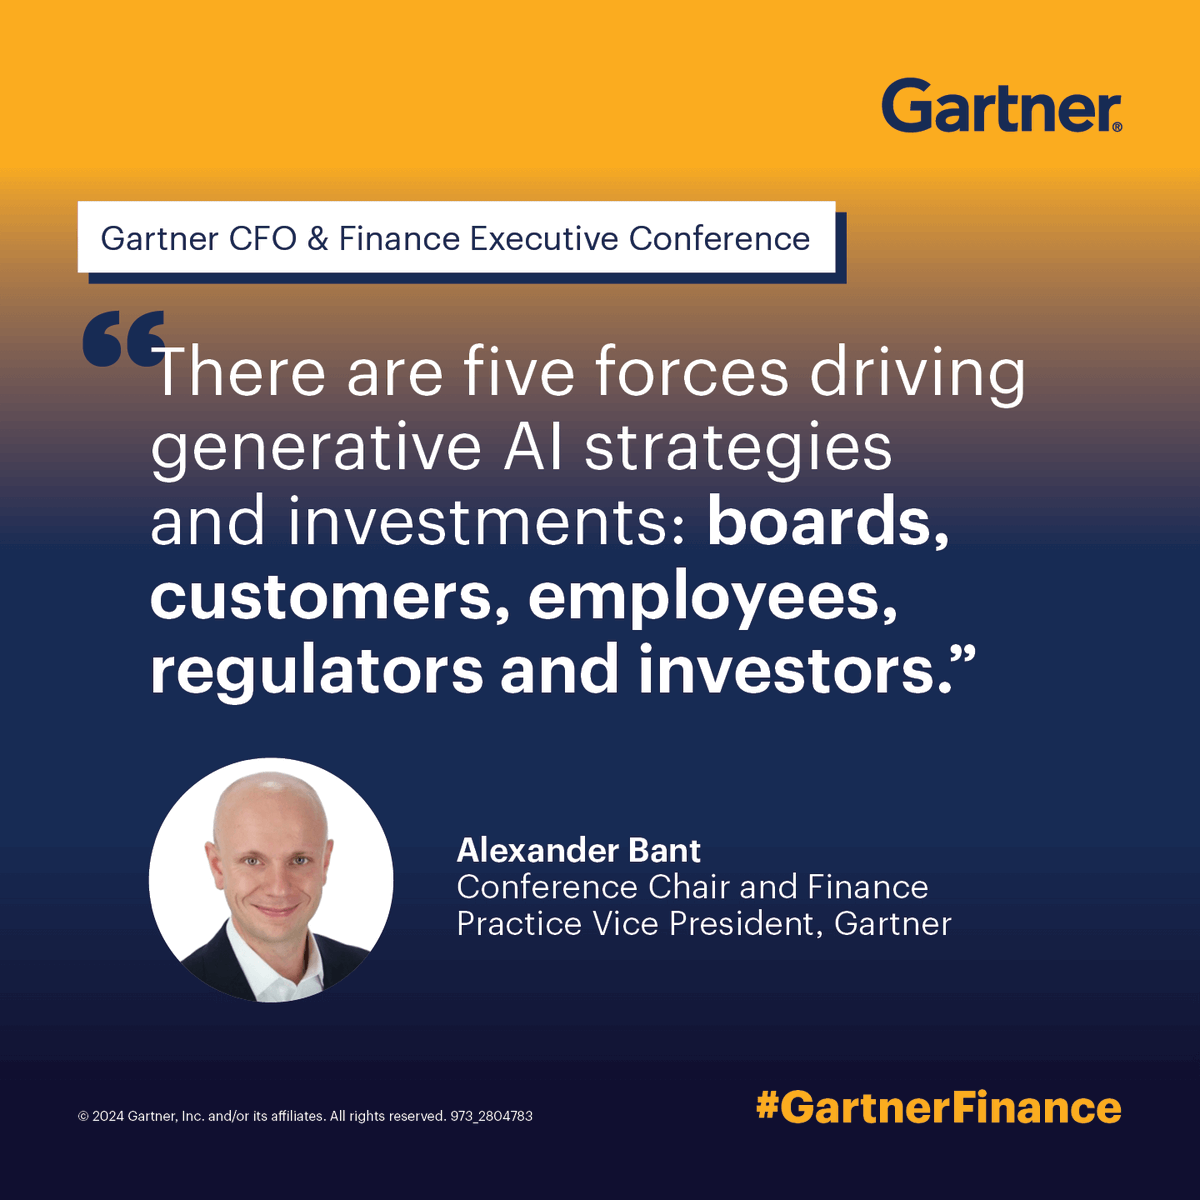 81% of CFOs are projecting to spend more on #GenAI in 2024. Gartner expert Alexander Bant shares the 5 forces pushing this forward. 

Get the tools you need to craft and implement an effective #finance #AI strategy at #GartnerFinance: gtnr.it/3Wo9pFg